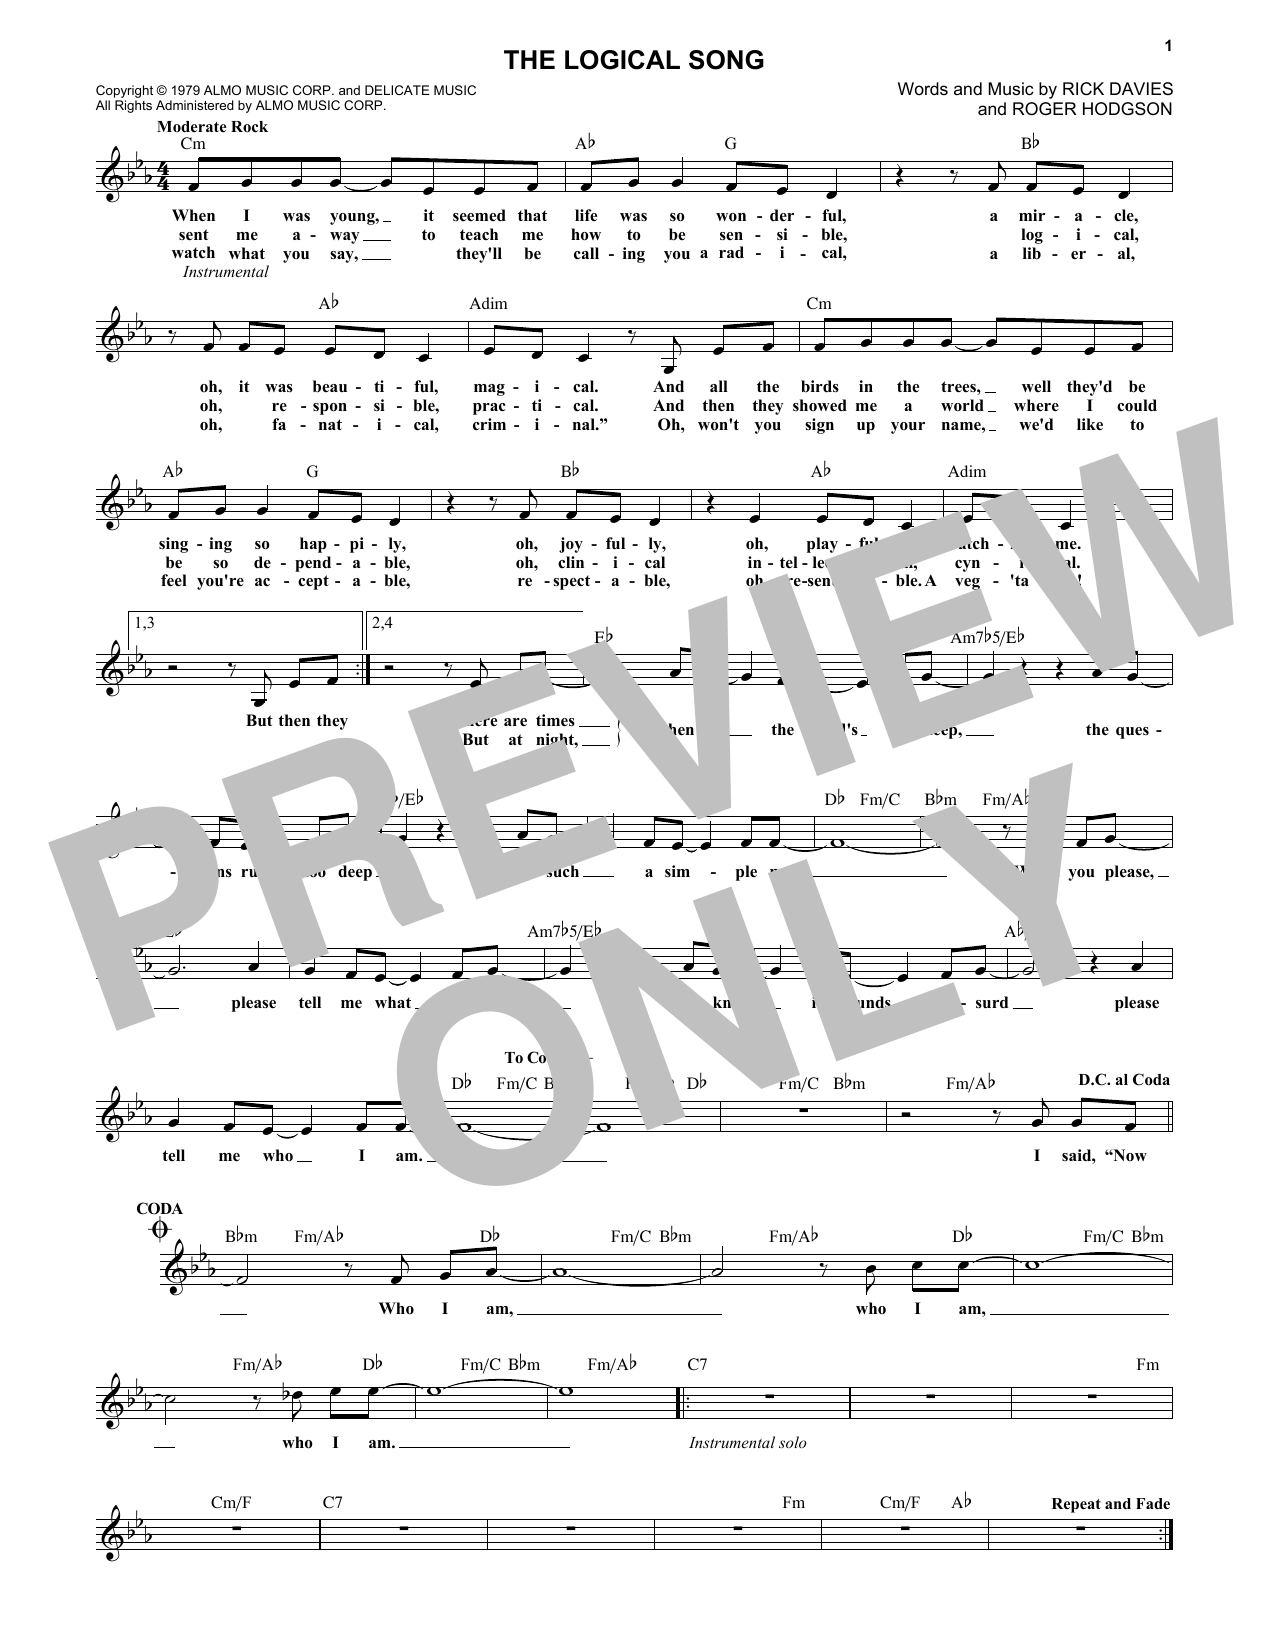 Download Supertramp The Logical Song Sheet Music